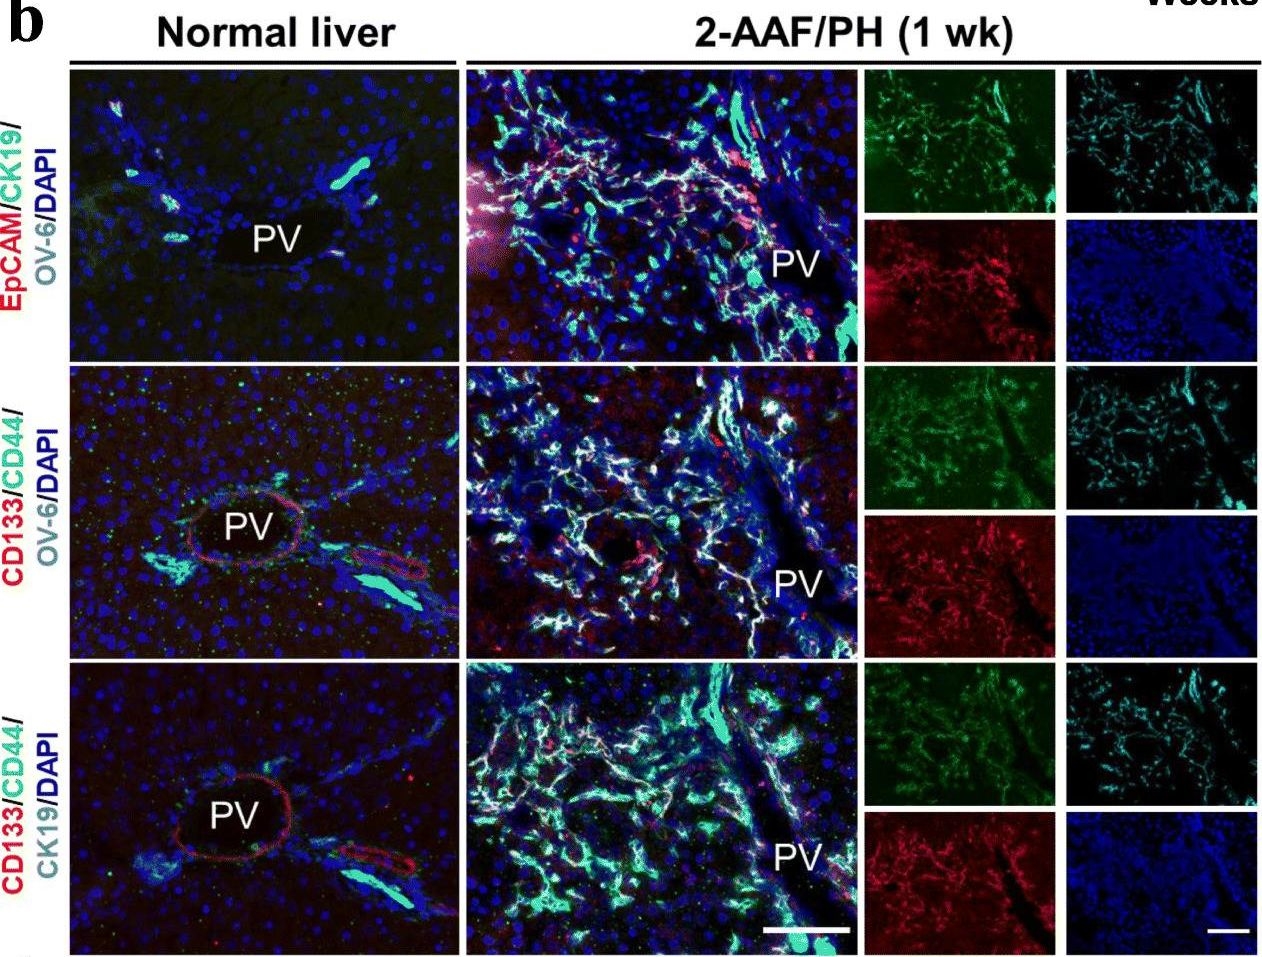 Hepatic stellate cells contribute to liver regeneration through galectins in hepatic stem cell niche.